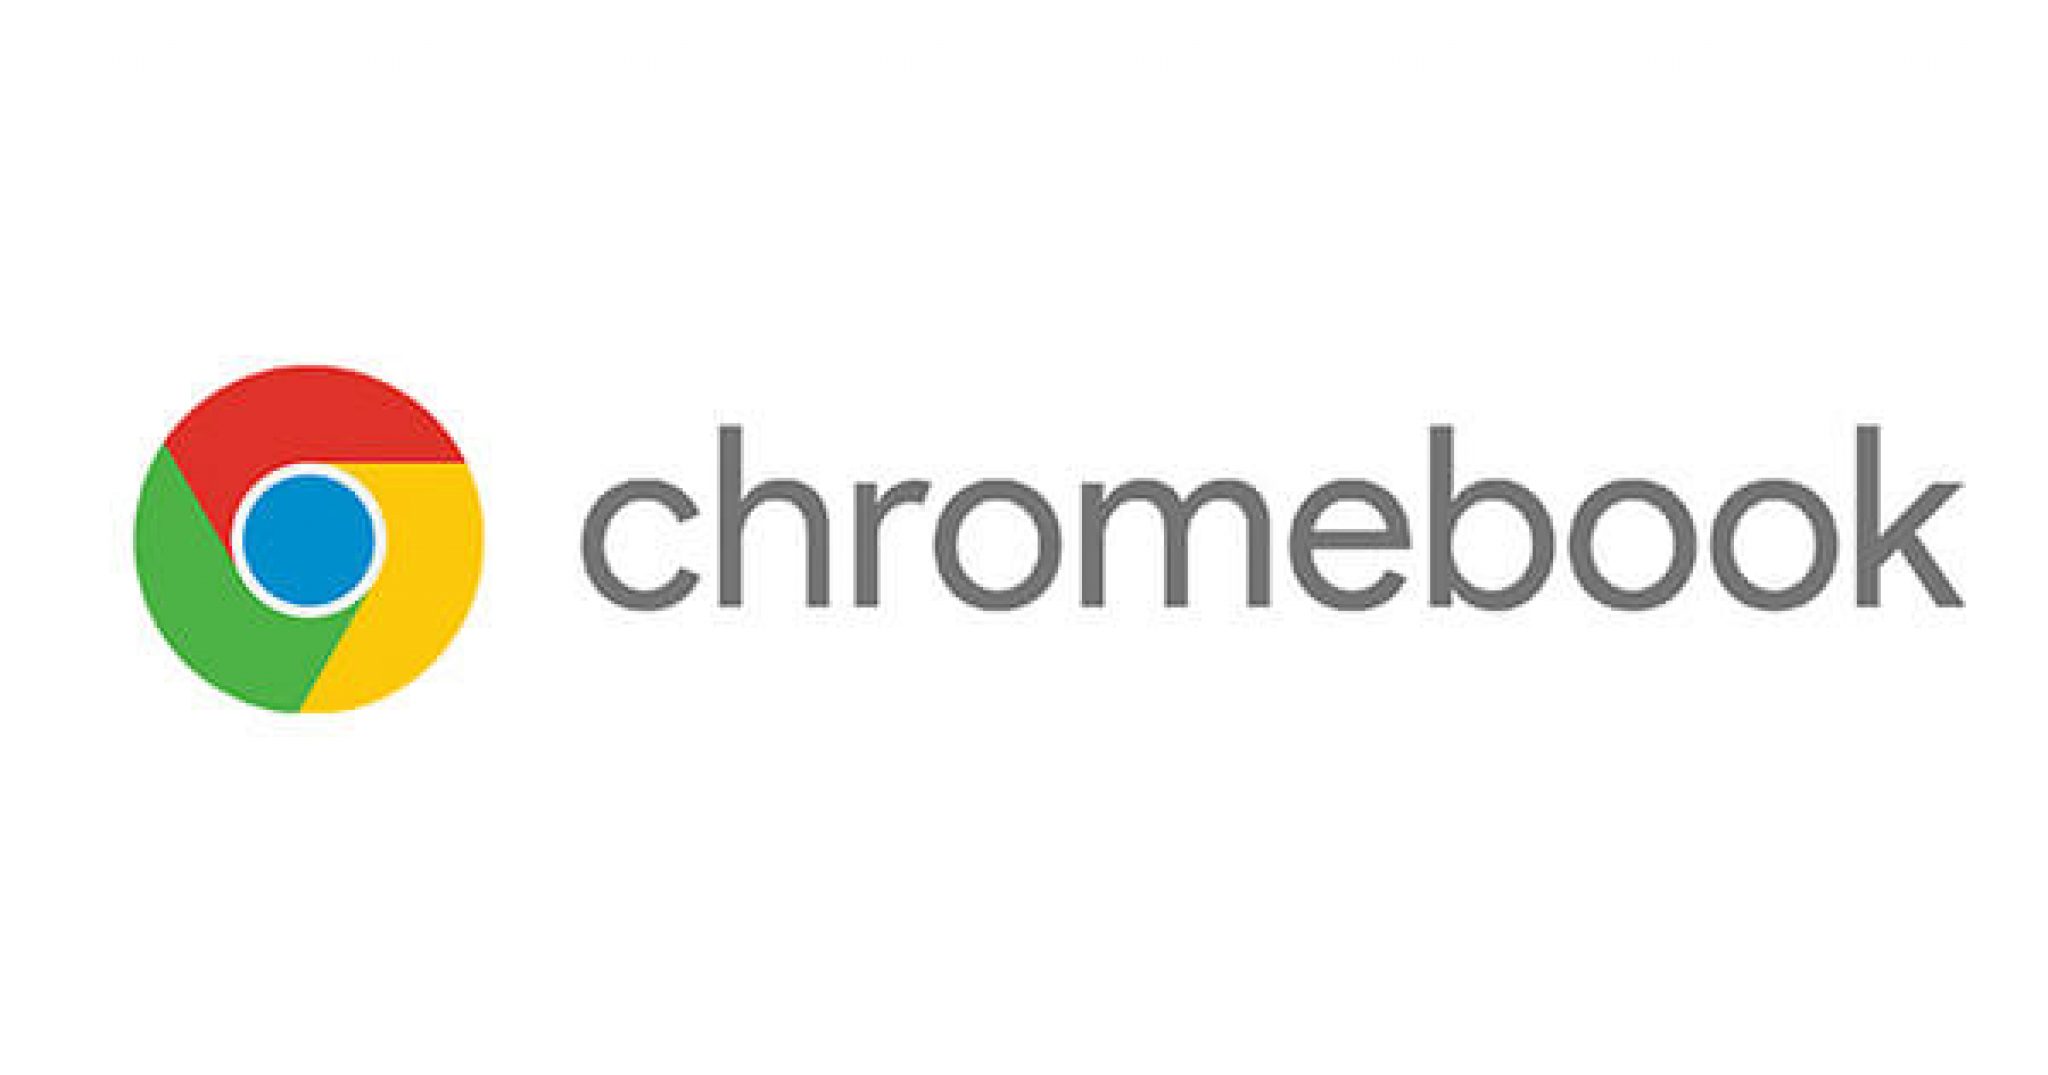 Best Chromebook VPN - Top 3 Choices for Speed and Security